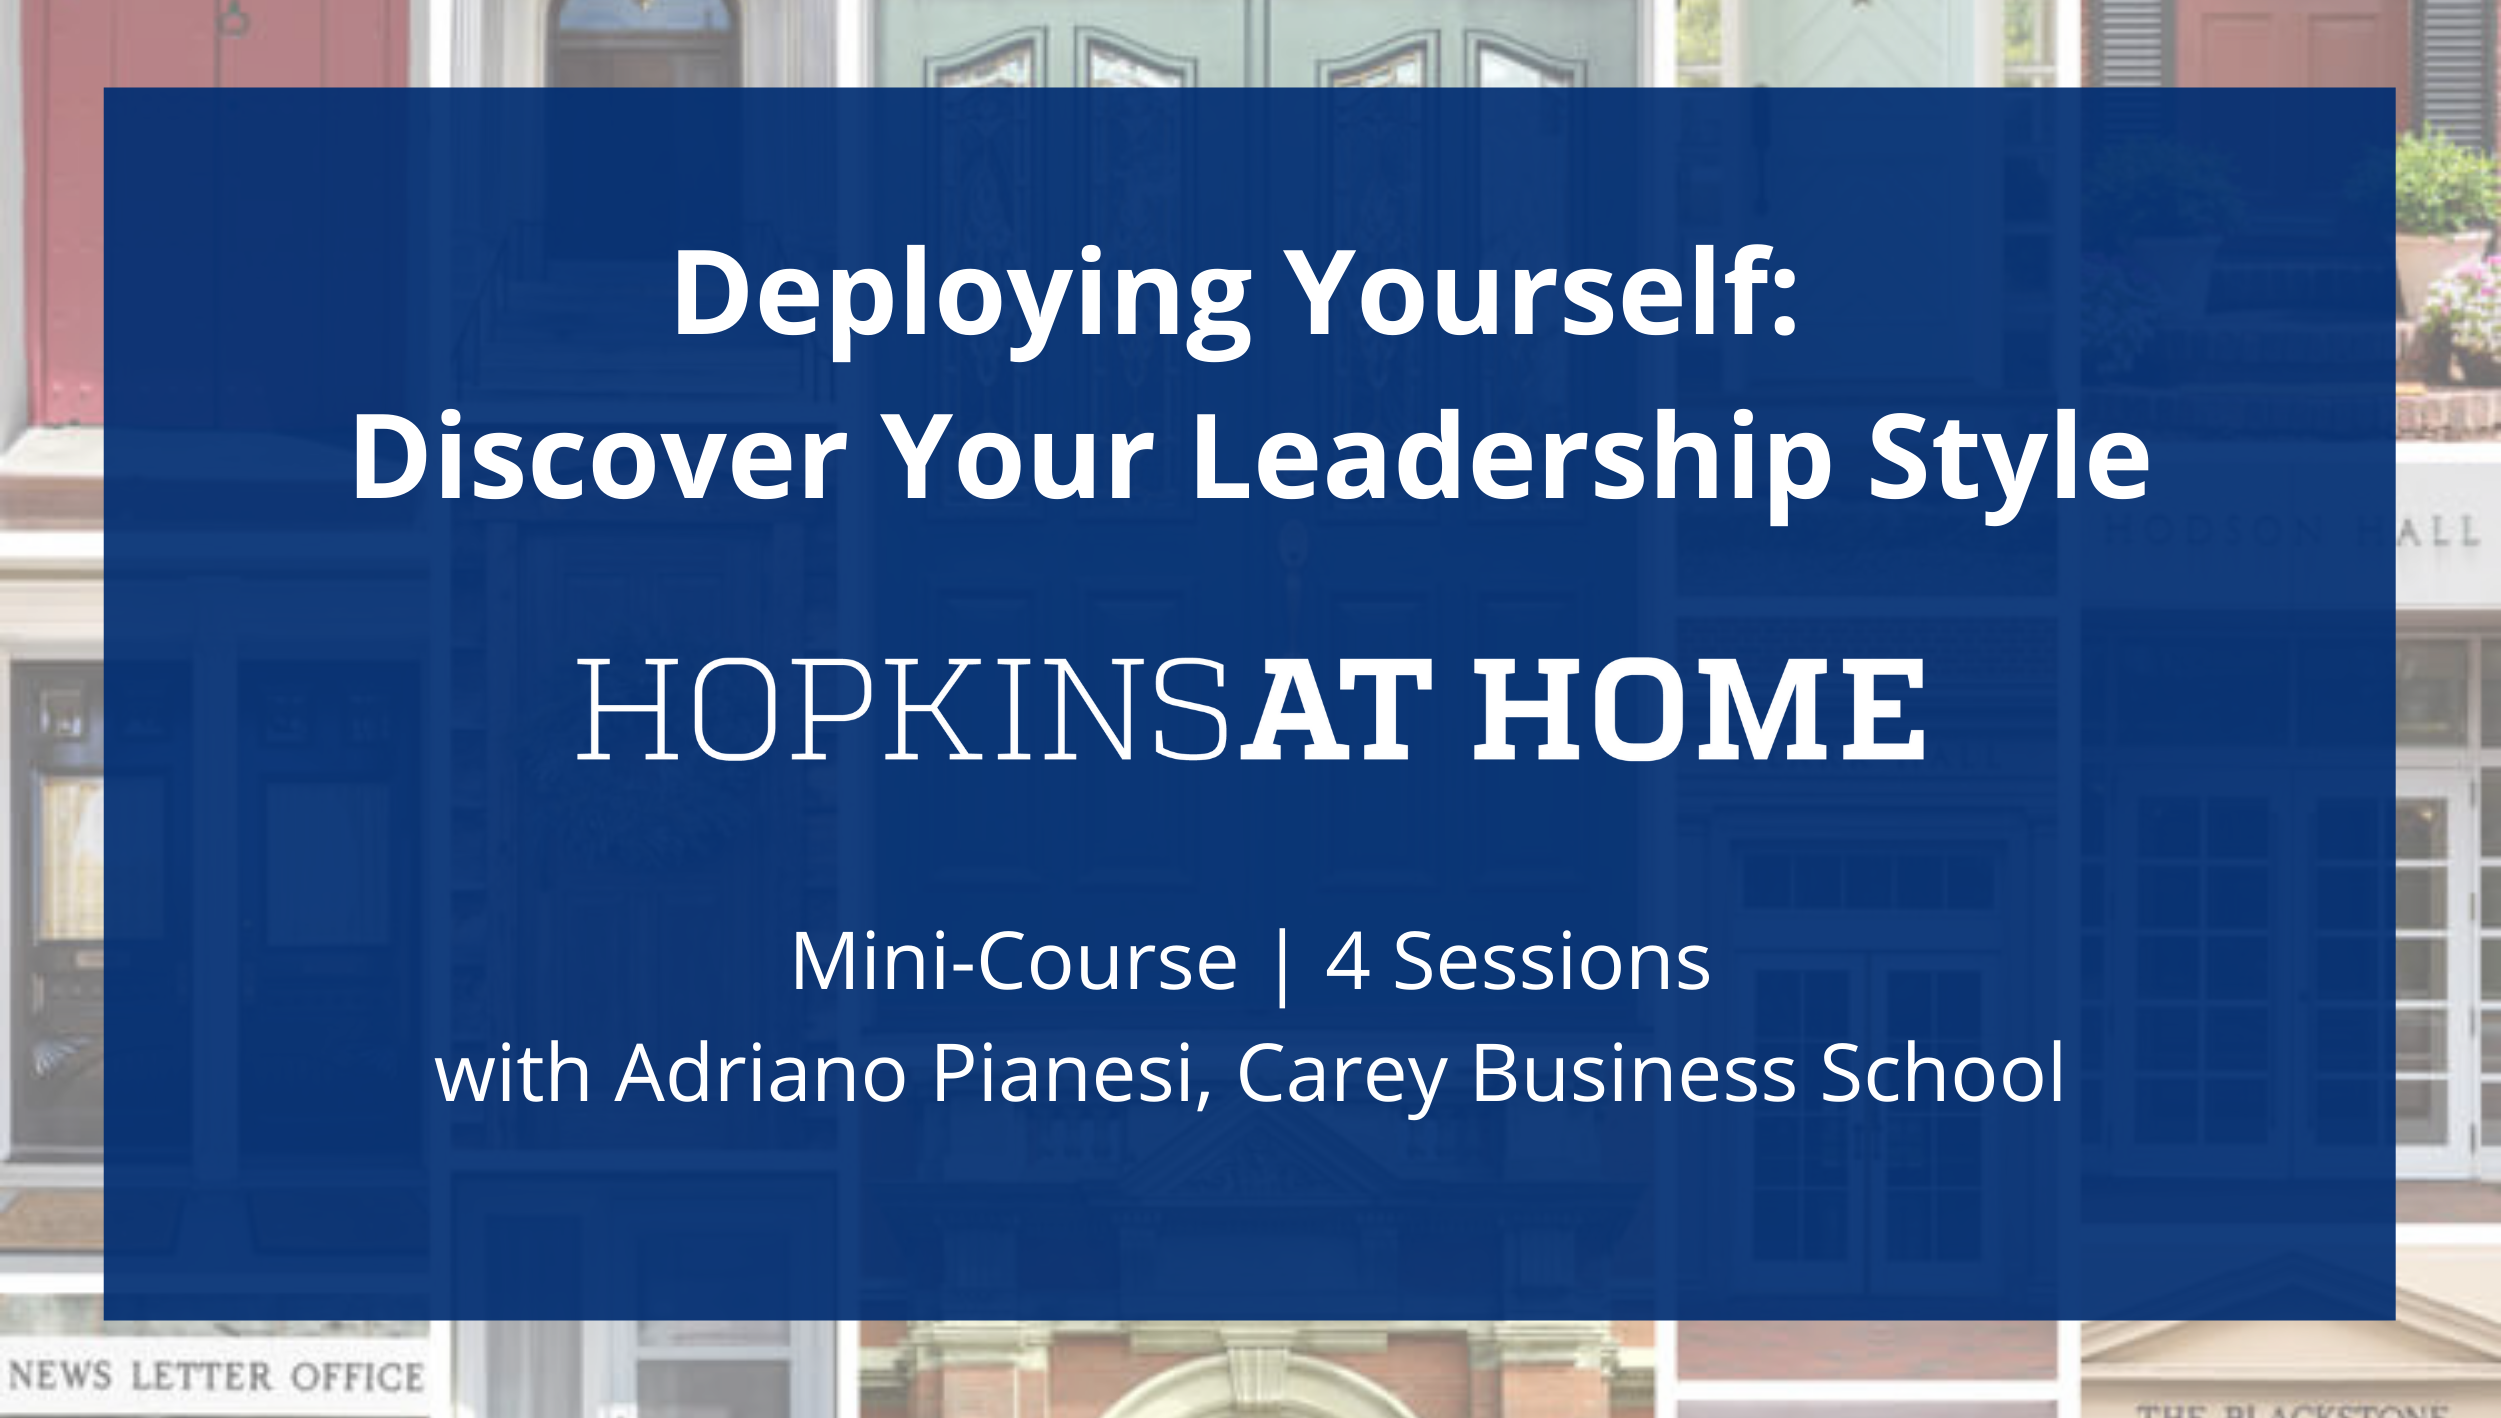 Deploying Yourself: Discover Your Leadership Style